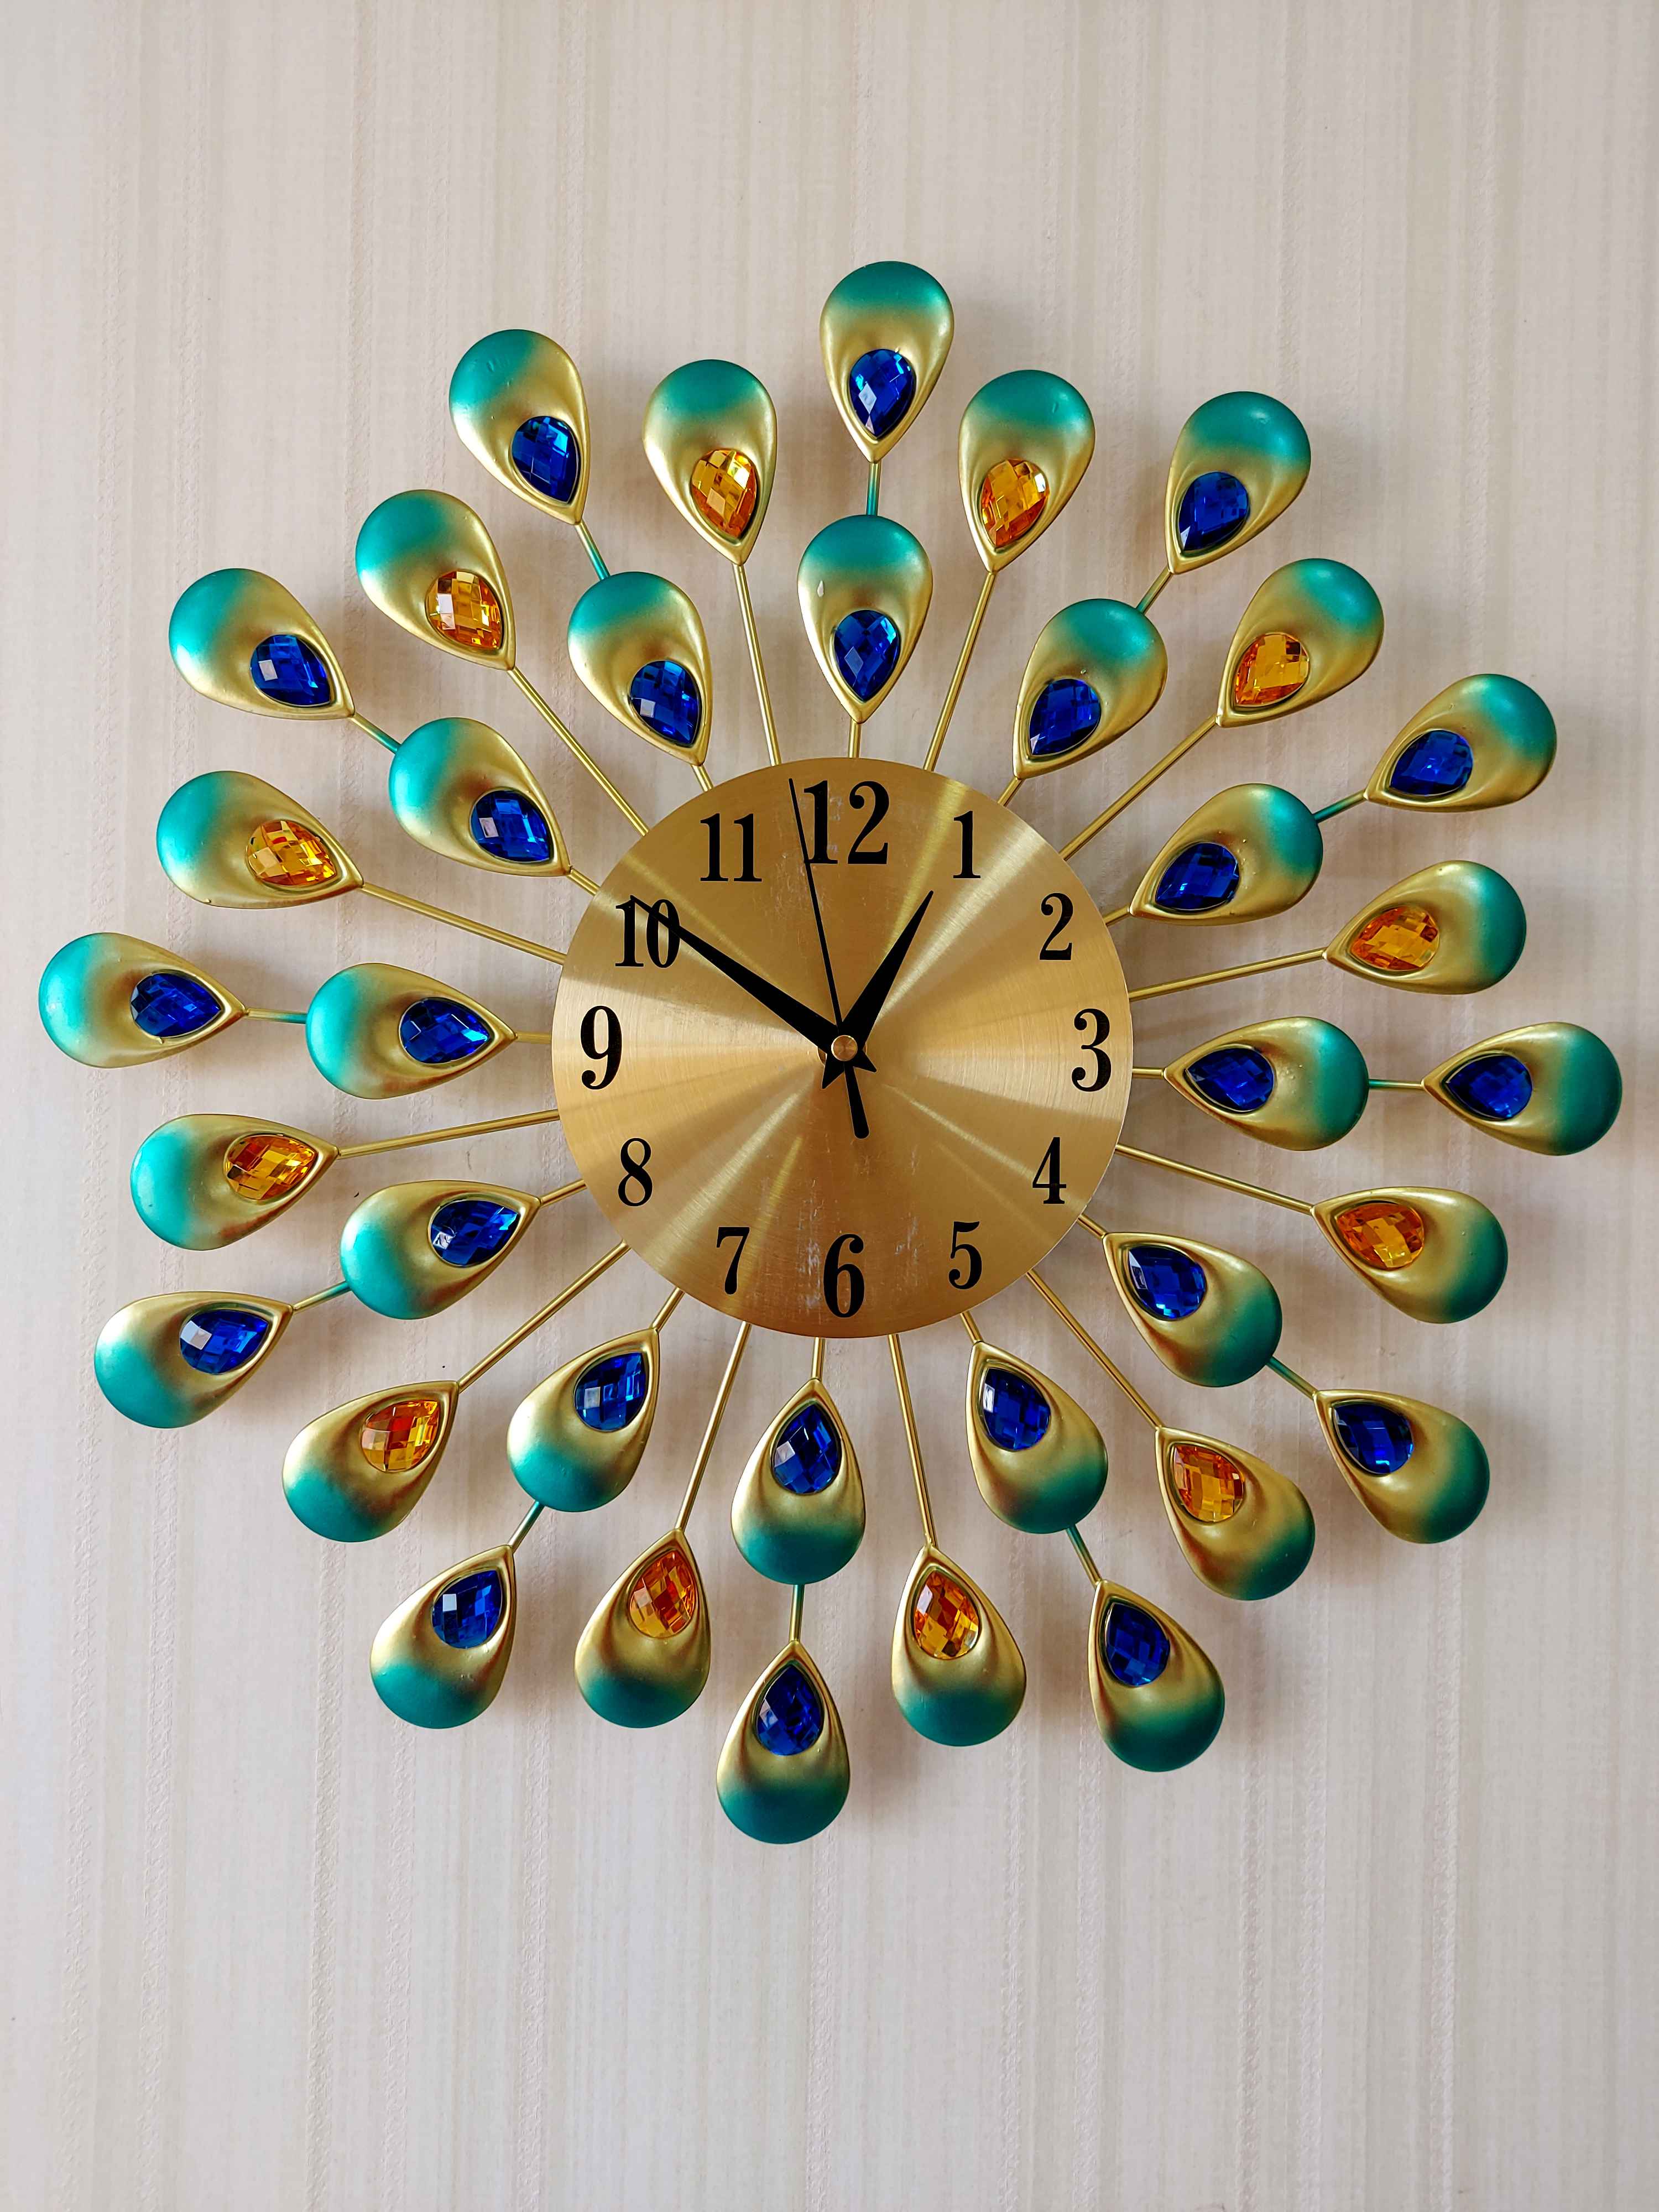 FunkyTradition 3D Multicolor Peacock Feather Pallets Diamond Studded Wall Clock, Wall Watch, Wall Decor for Home Office Decor and Gifts 45 CM Tall